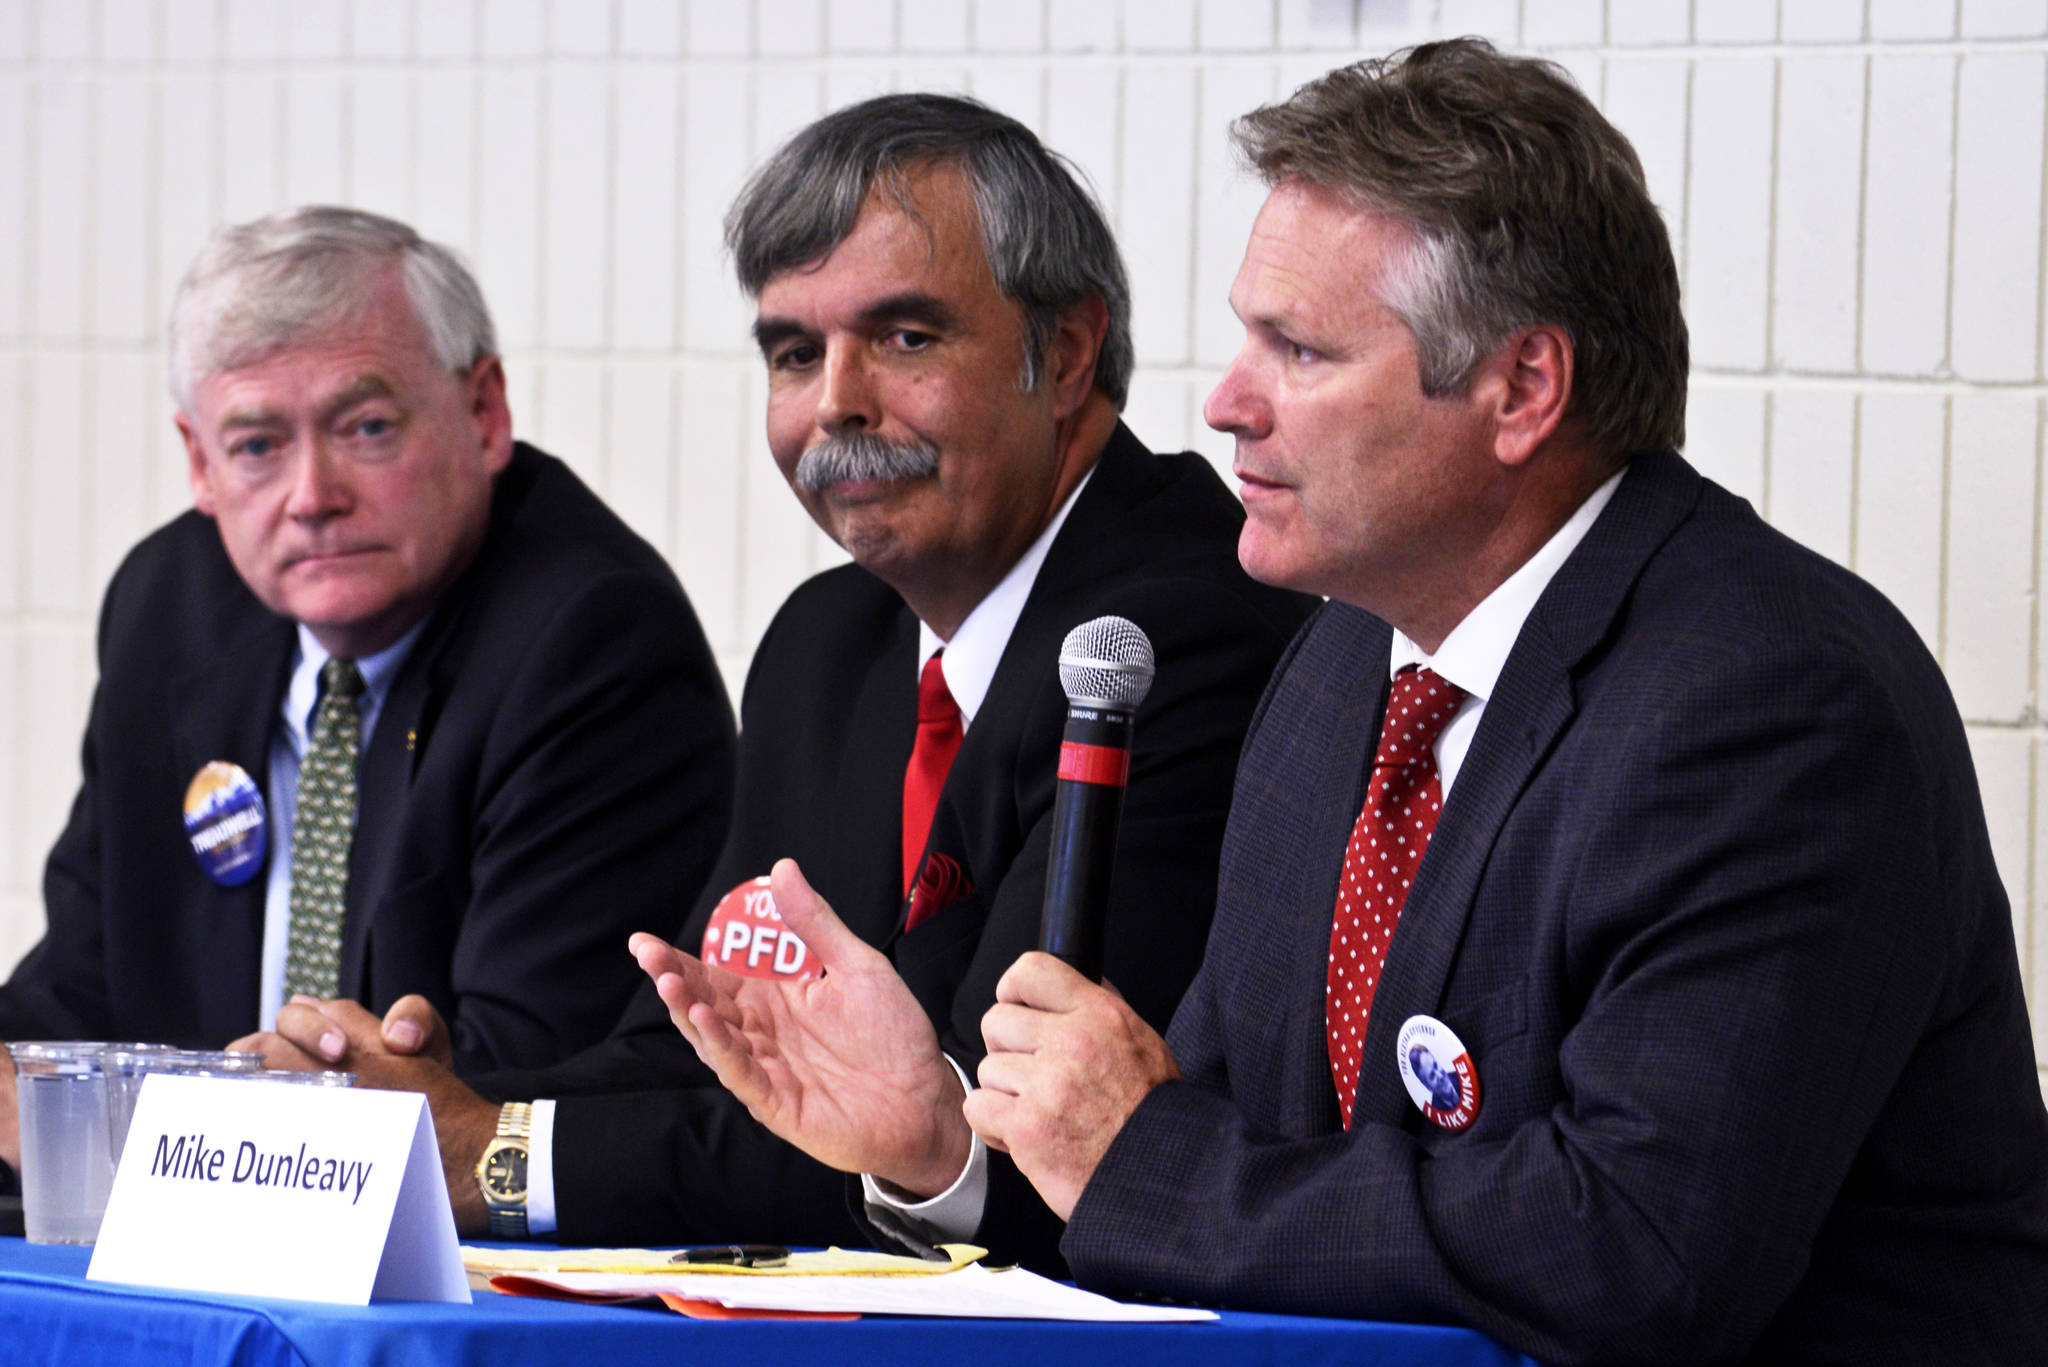 Three of this year’s five Republican gubernatorial candidates — Mead Treadwell (left), Michael Sheldon, and Mike Dunleavy — speak to members of the Kenai and Soldotna Chambers of Commerce on Wednesday at the Soldotna Regional Sports Complex in Soldotna. In the primary election on August 21, voters will choose a candidate to run on the party ballot in the November 6 general election. (Ben Boettger/Peninsula Clarion)